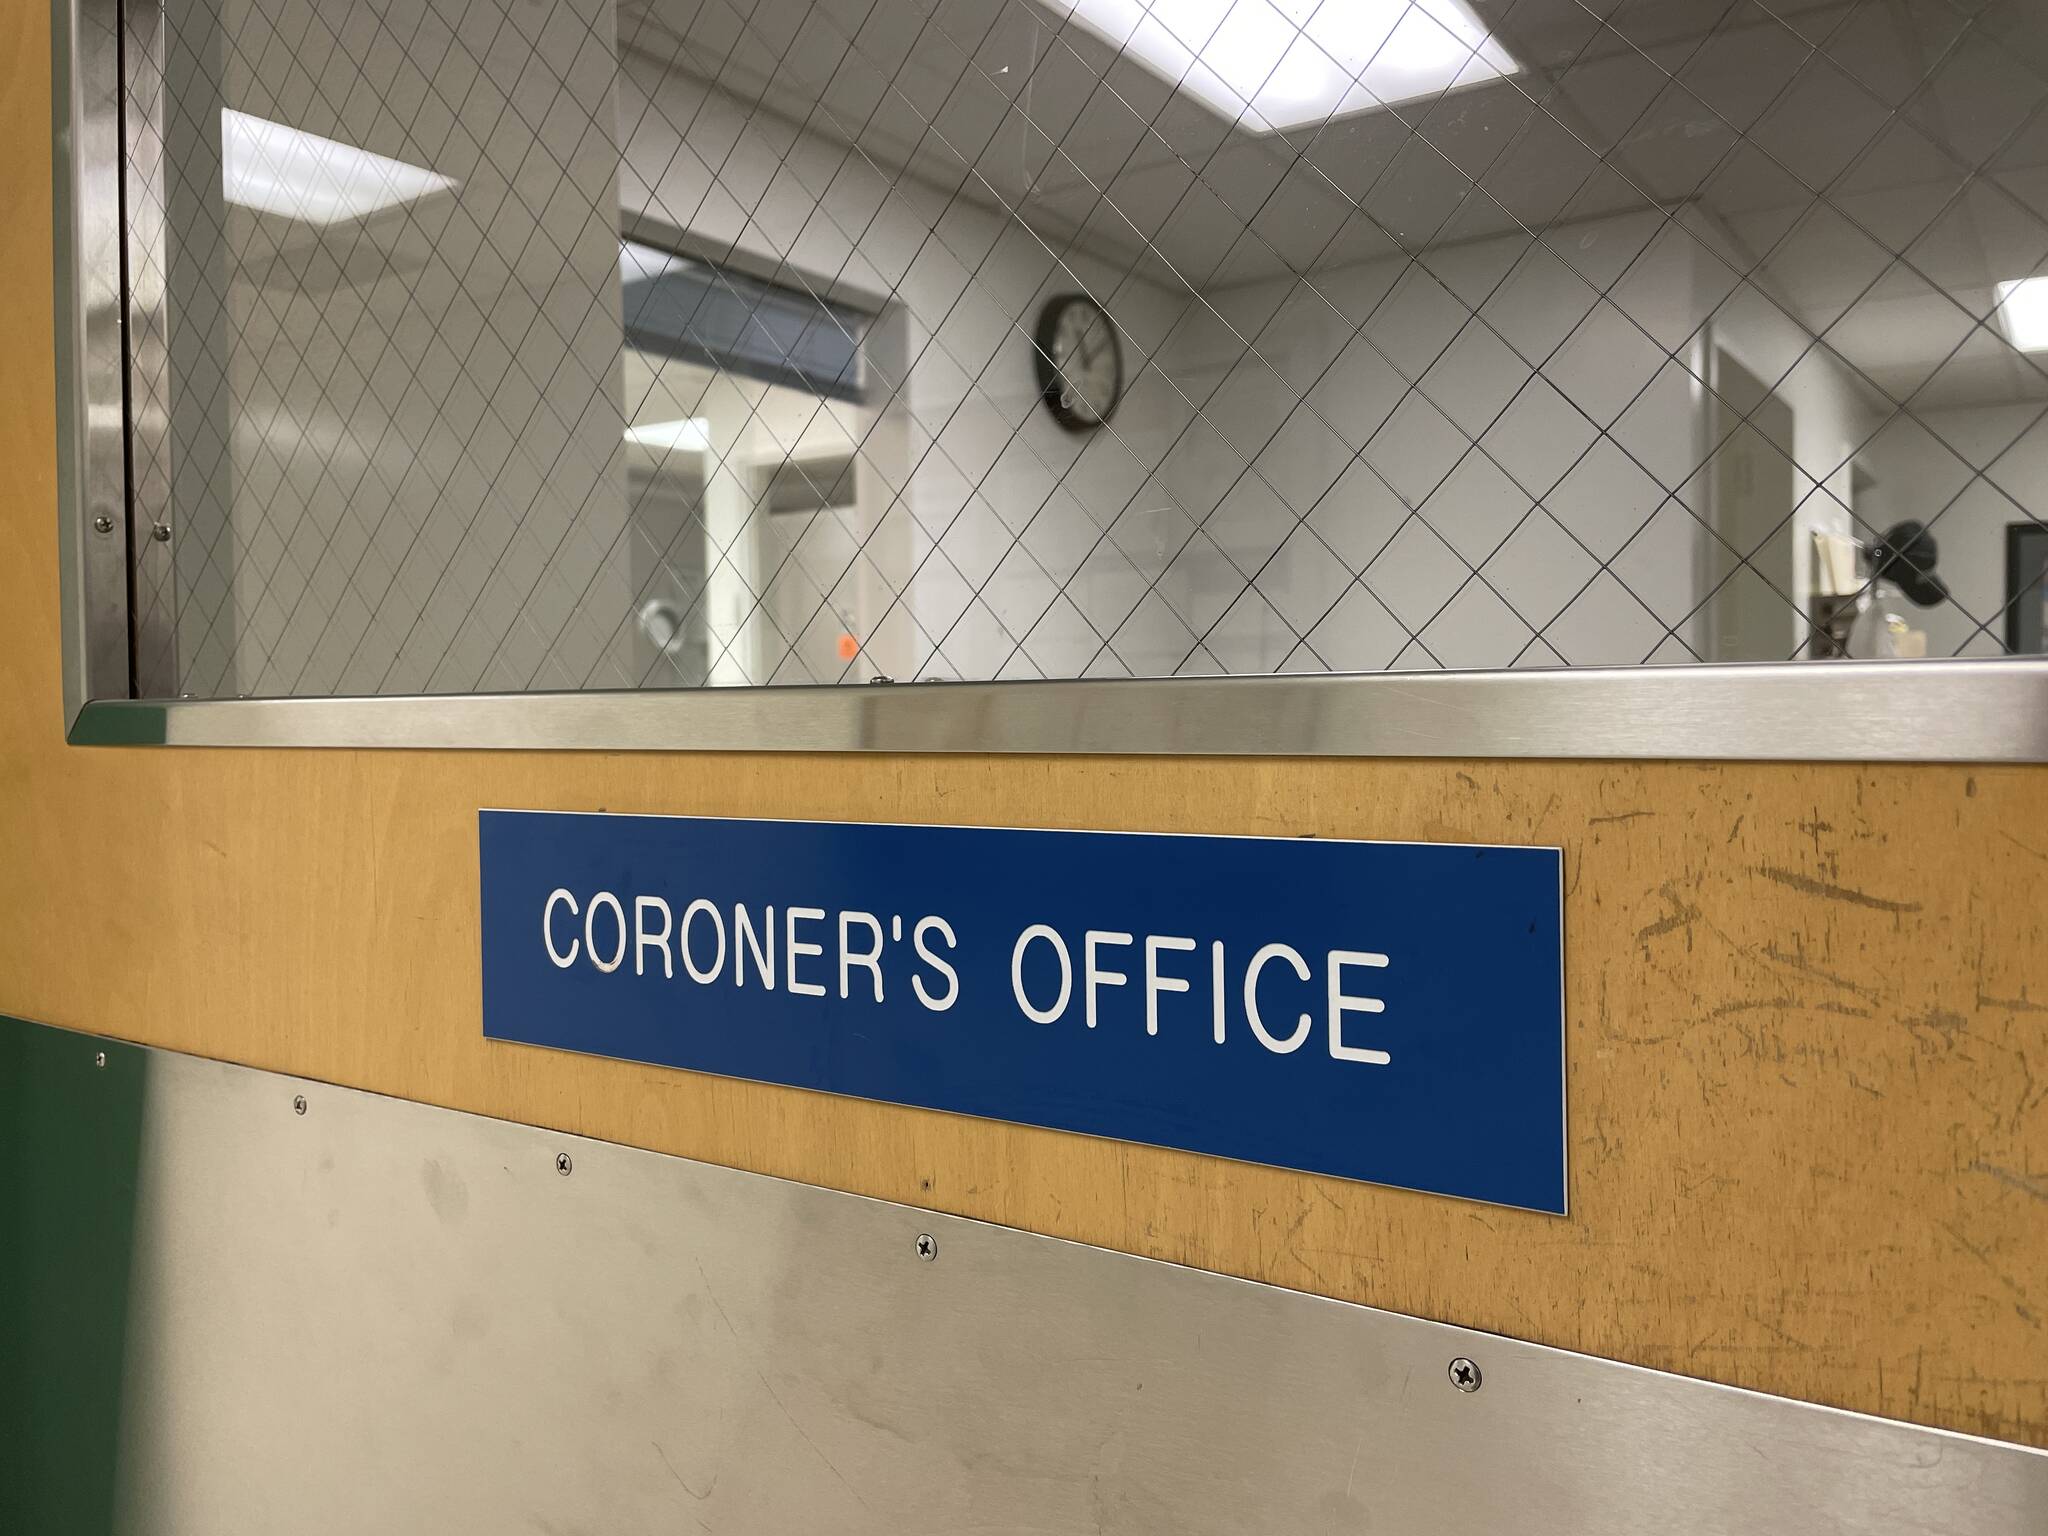 An autopsy for a dead man found in a creek last week is scheduled for Friday, Feb. 3, according to a spokesperson for the county coroner’s office. (Michael S. Lockett / The Daily World)